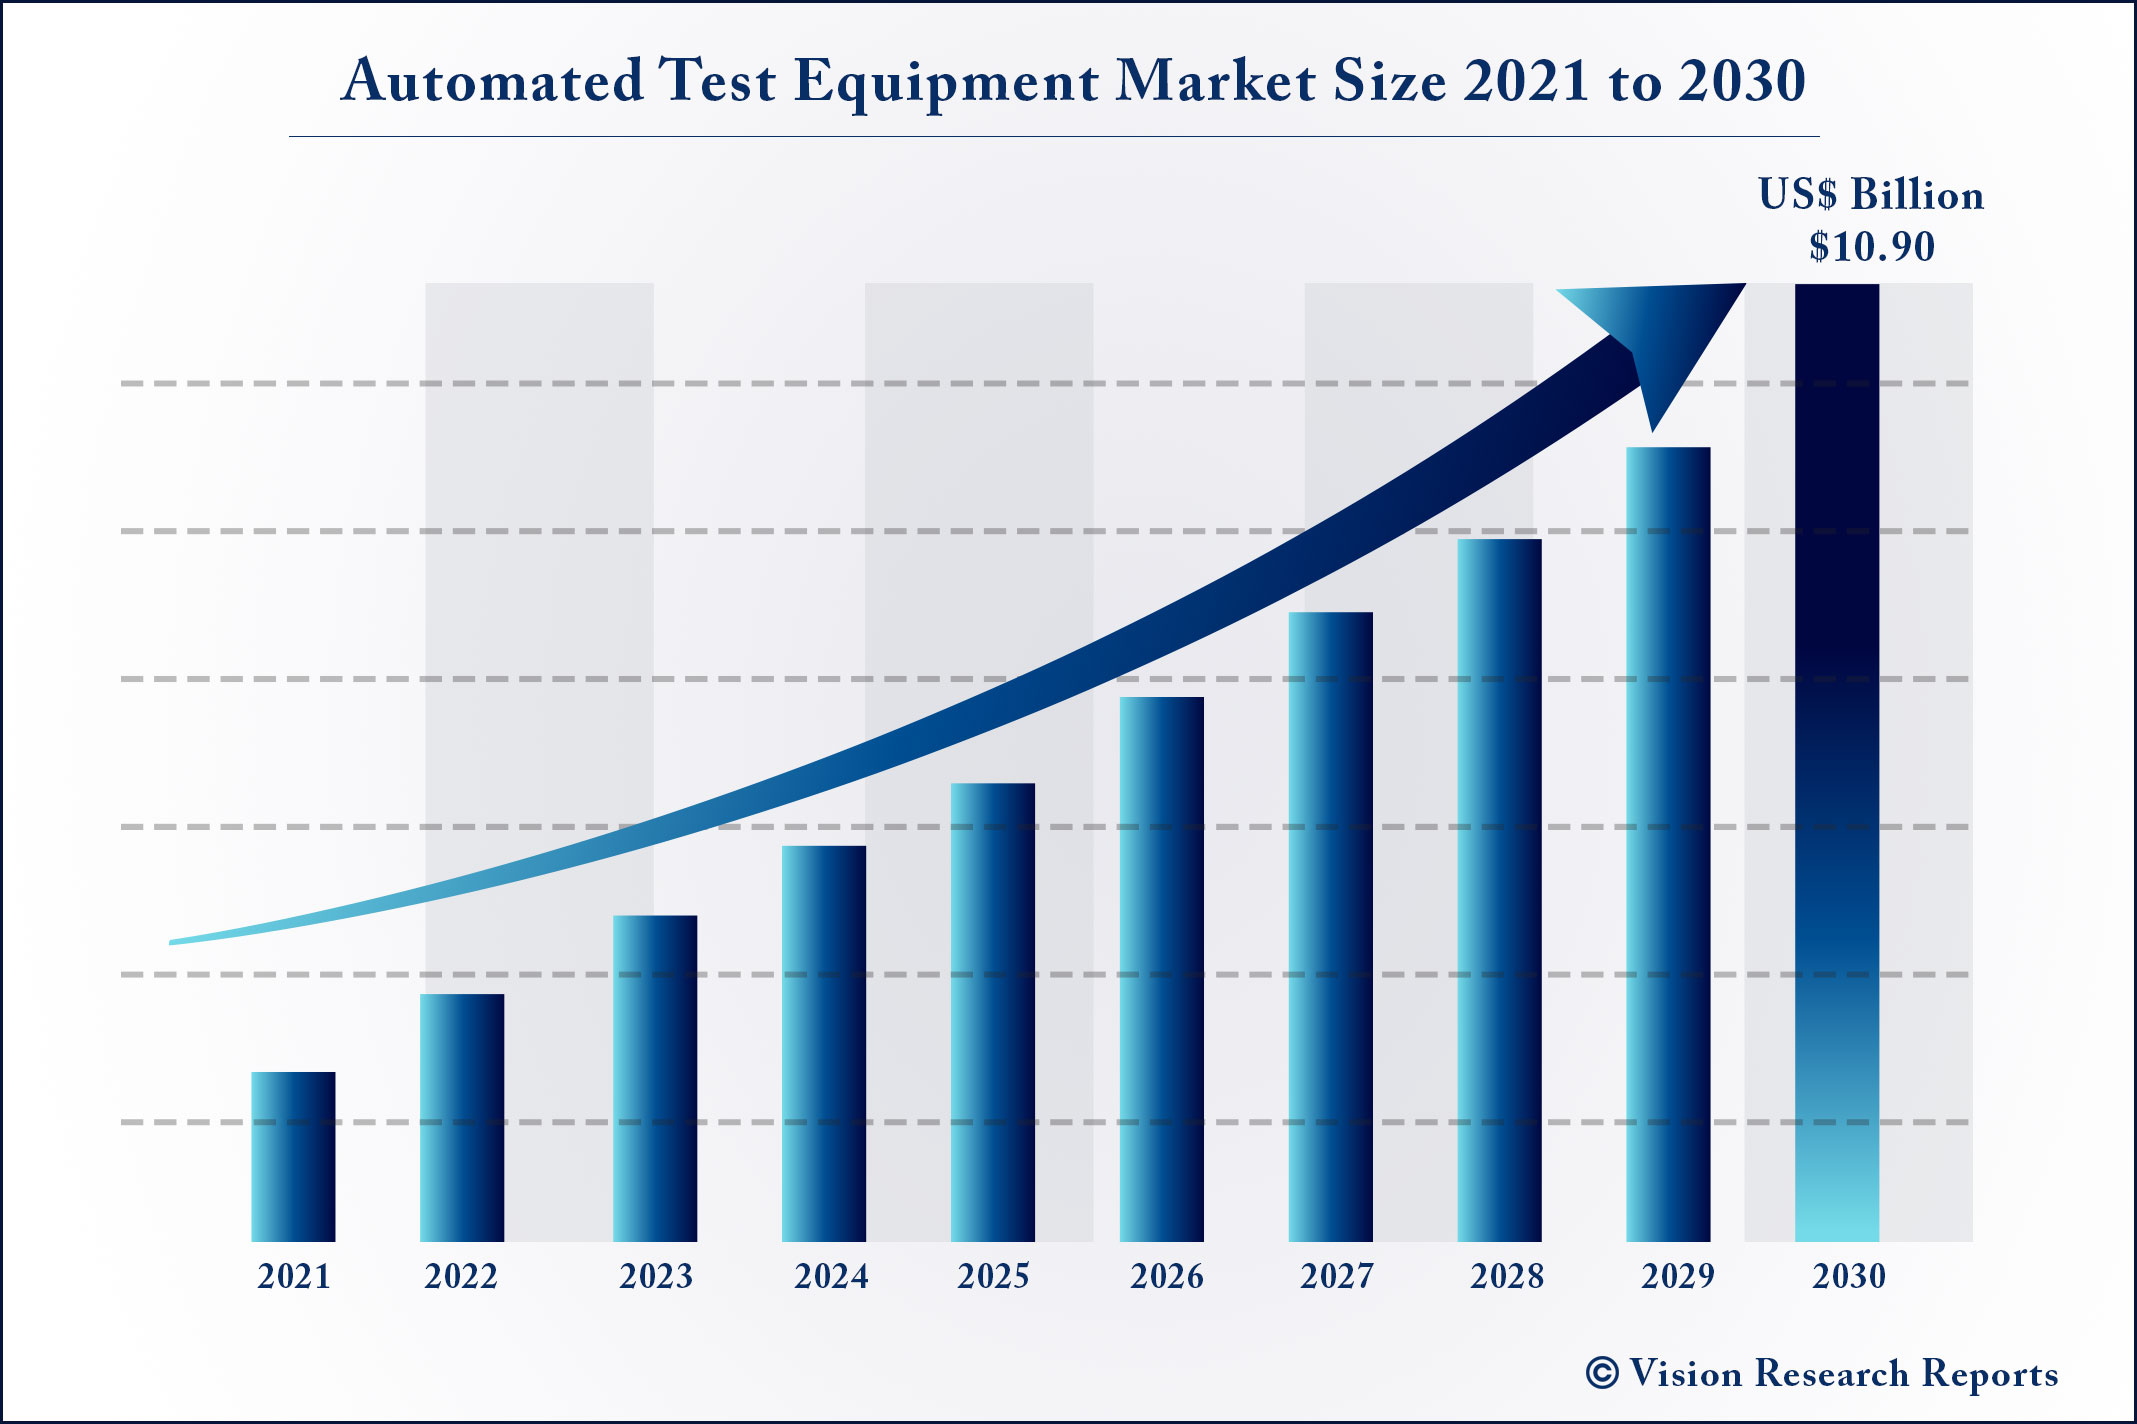 Automated Test Equipment Market Size 2021 to 2030